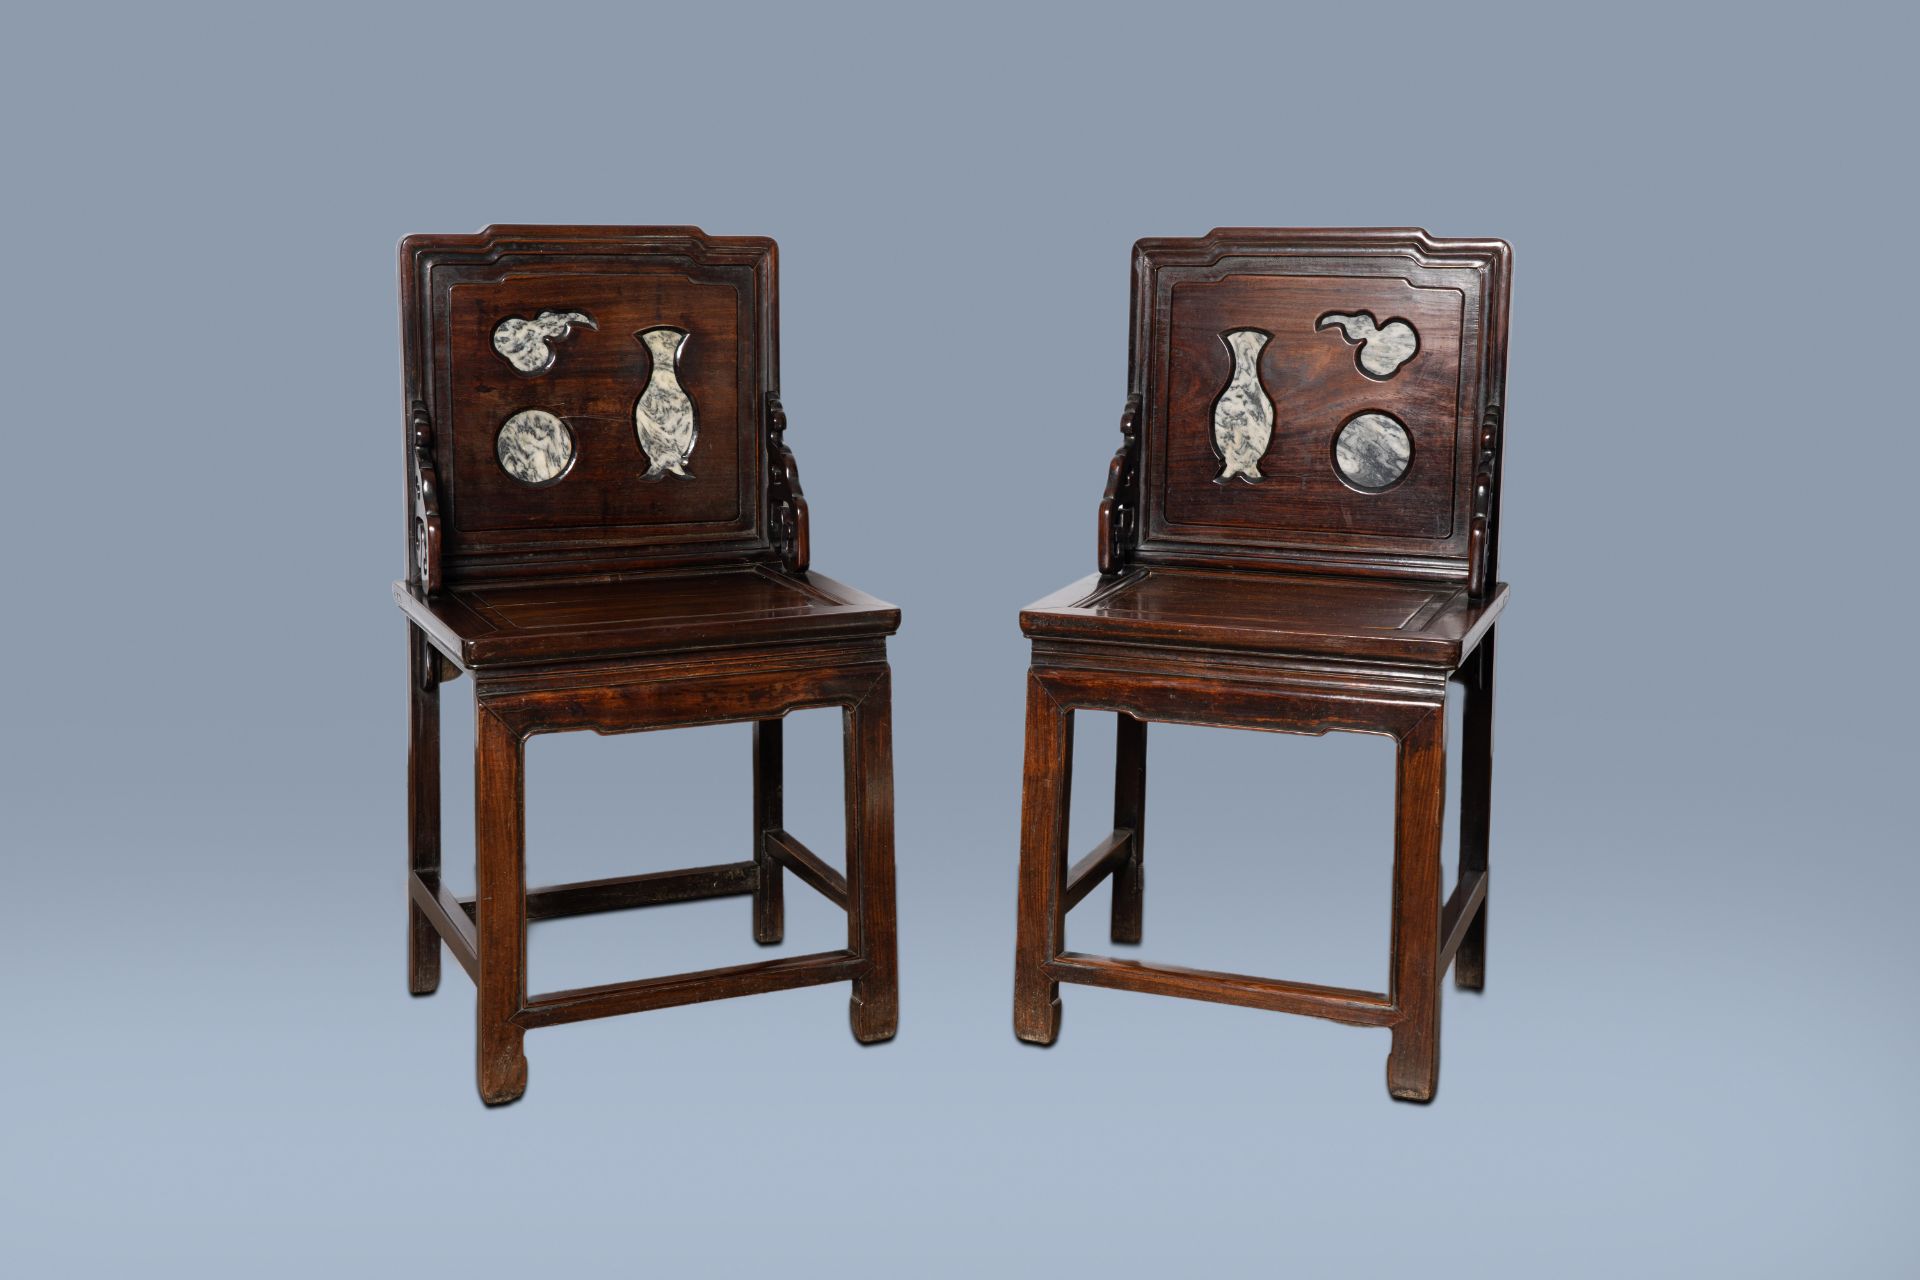 A pair of Chinese wood chairs with dreamstone plaques, 19th/20th C.